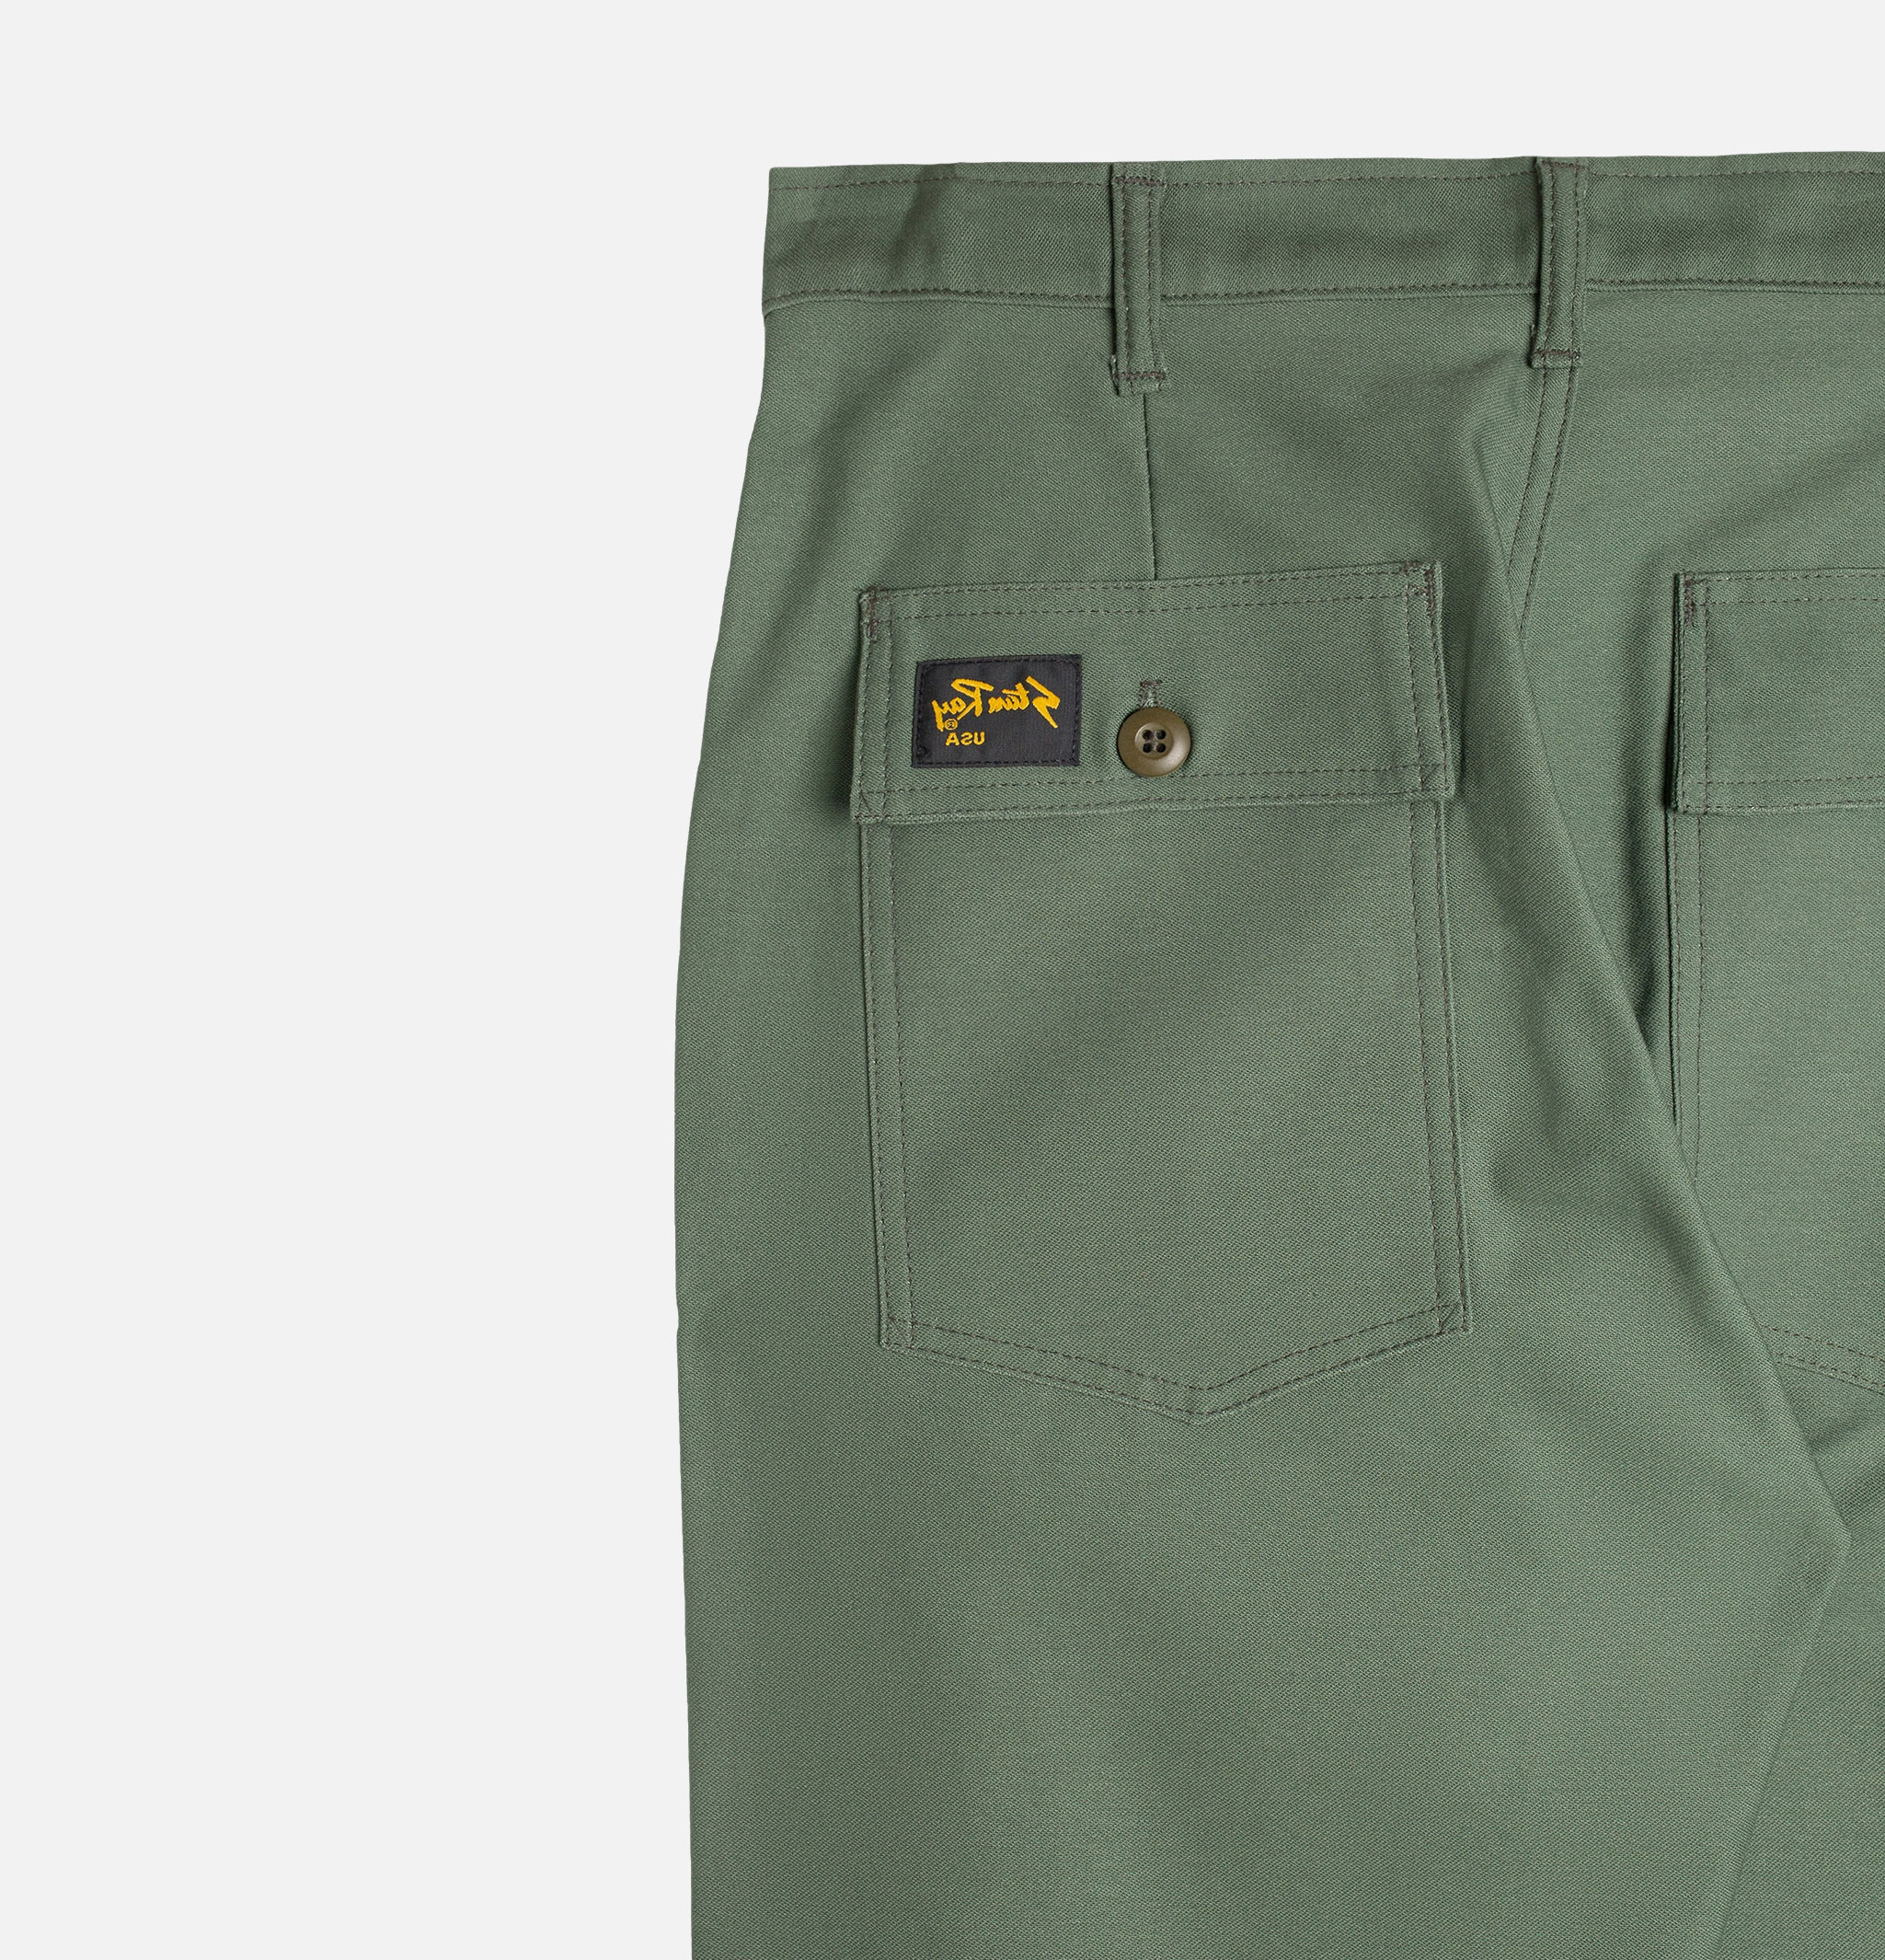 Stan Ray Pant 4 Pocket Fatigue Unwashed Olive Sateen